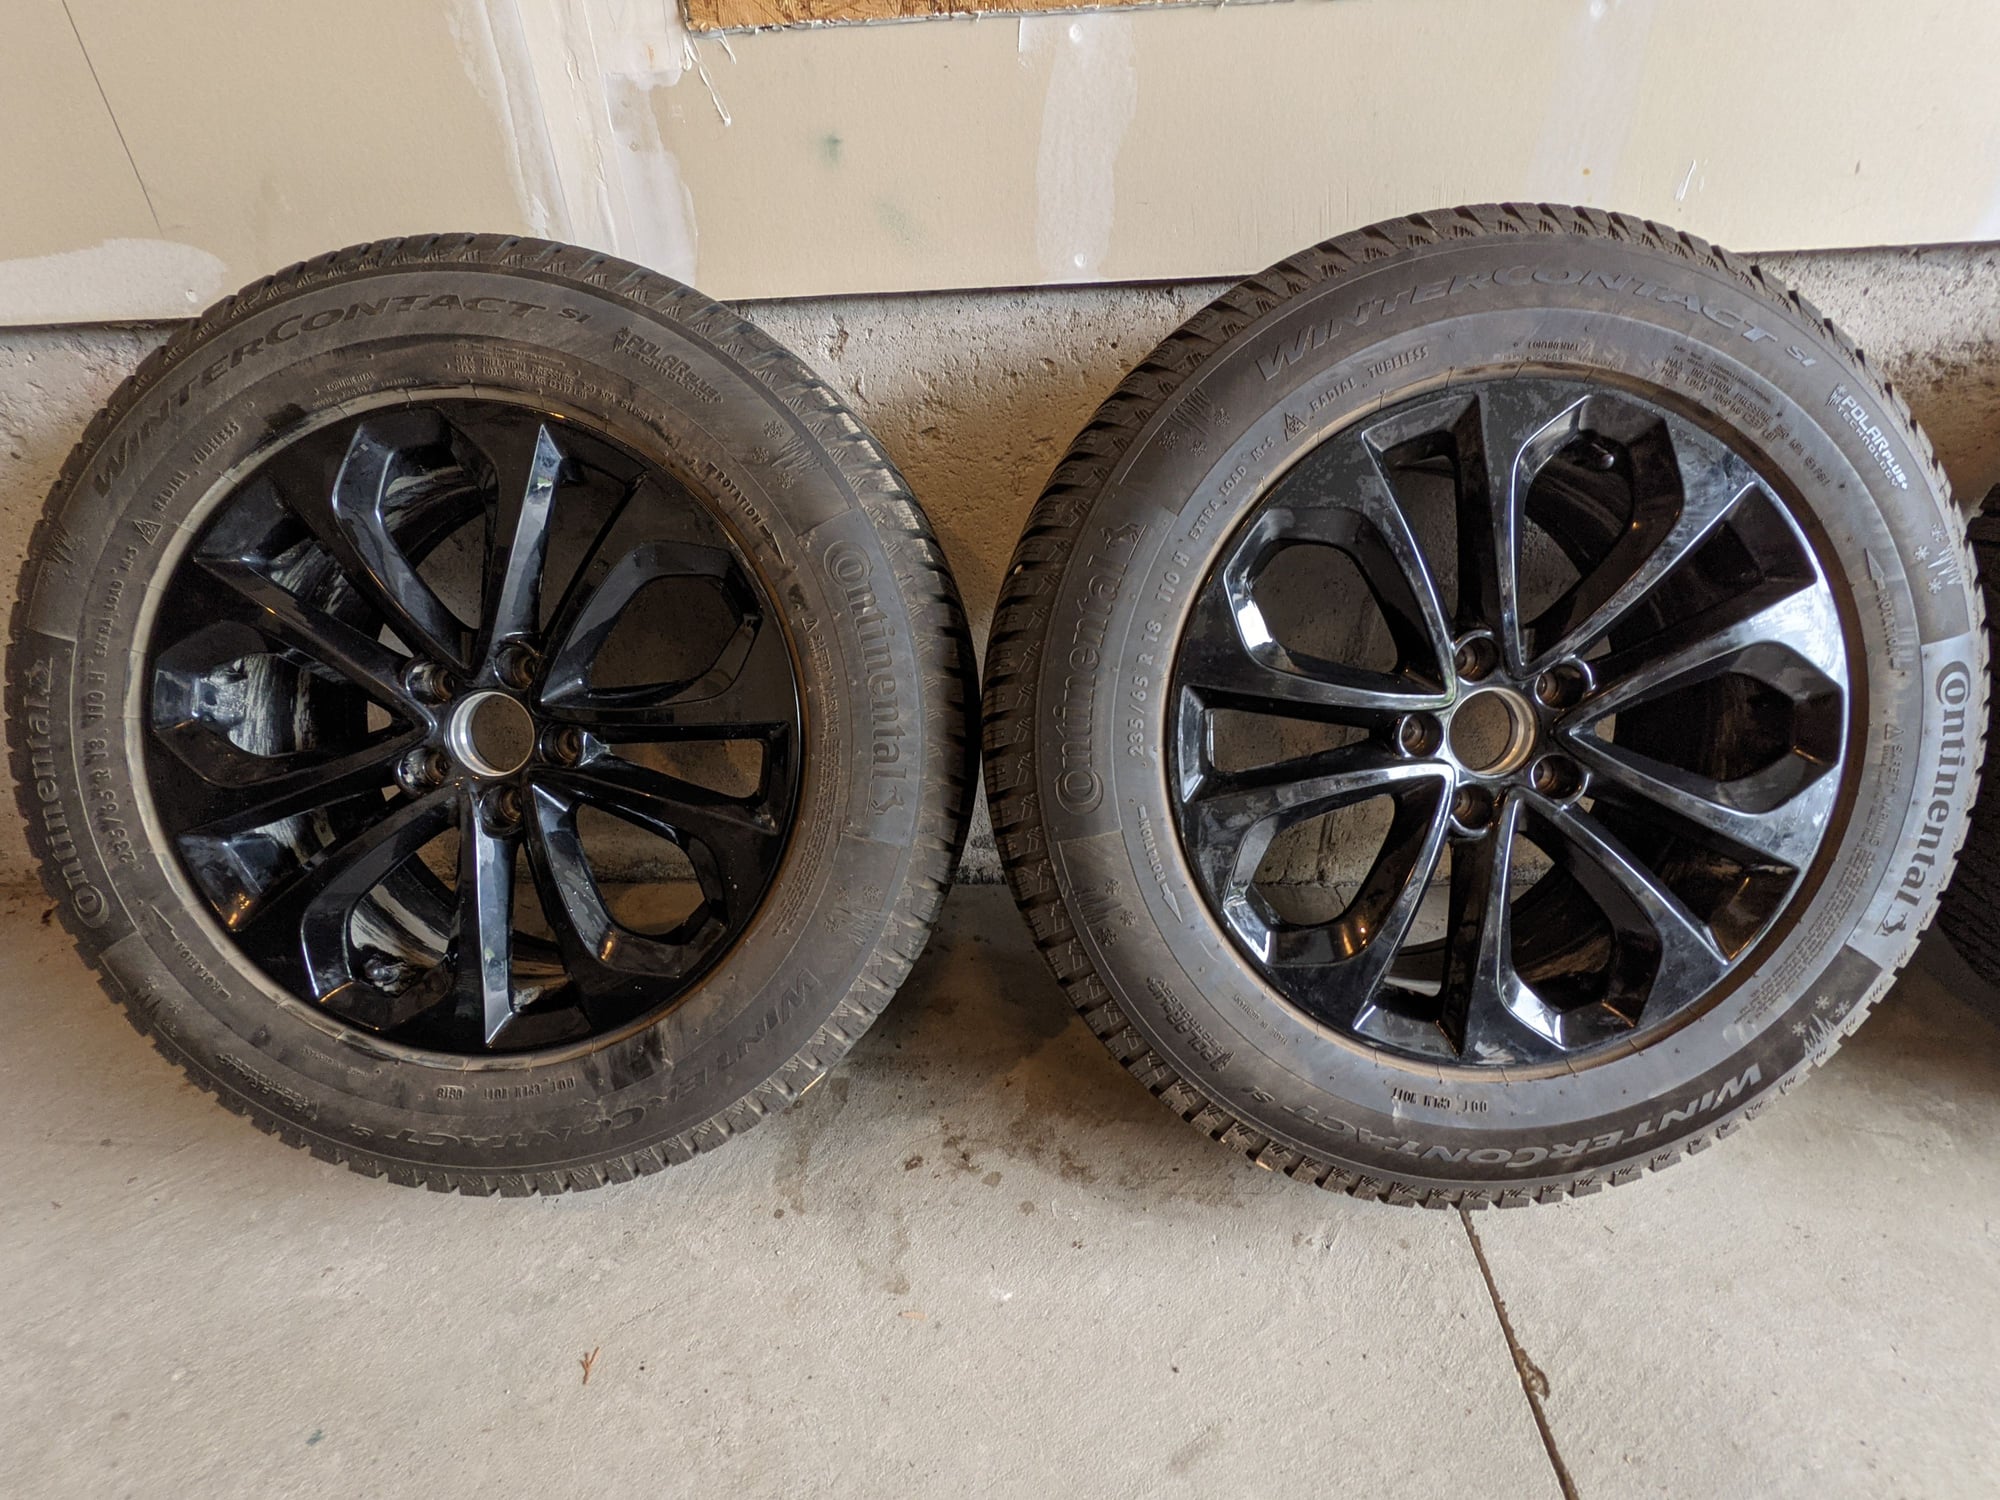 Wheels and Tires/Axles - FS: Acura RDX winter tires and wheels pkg equipped with TPMS (only used for 1 season) - Used - 2019 to 2021 Acura RDX - Kitchener, ON N2R0A7, Canada